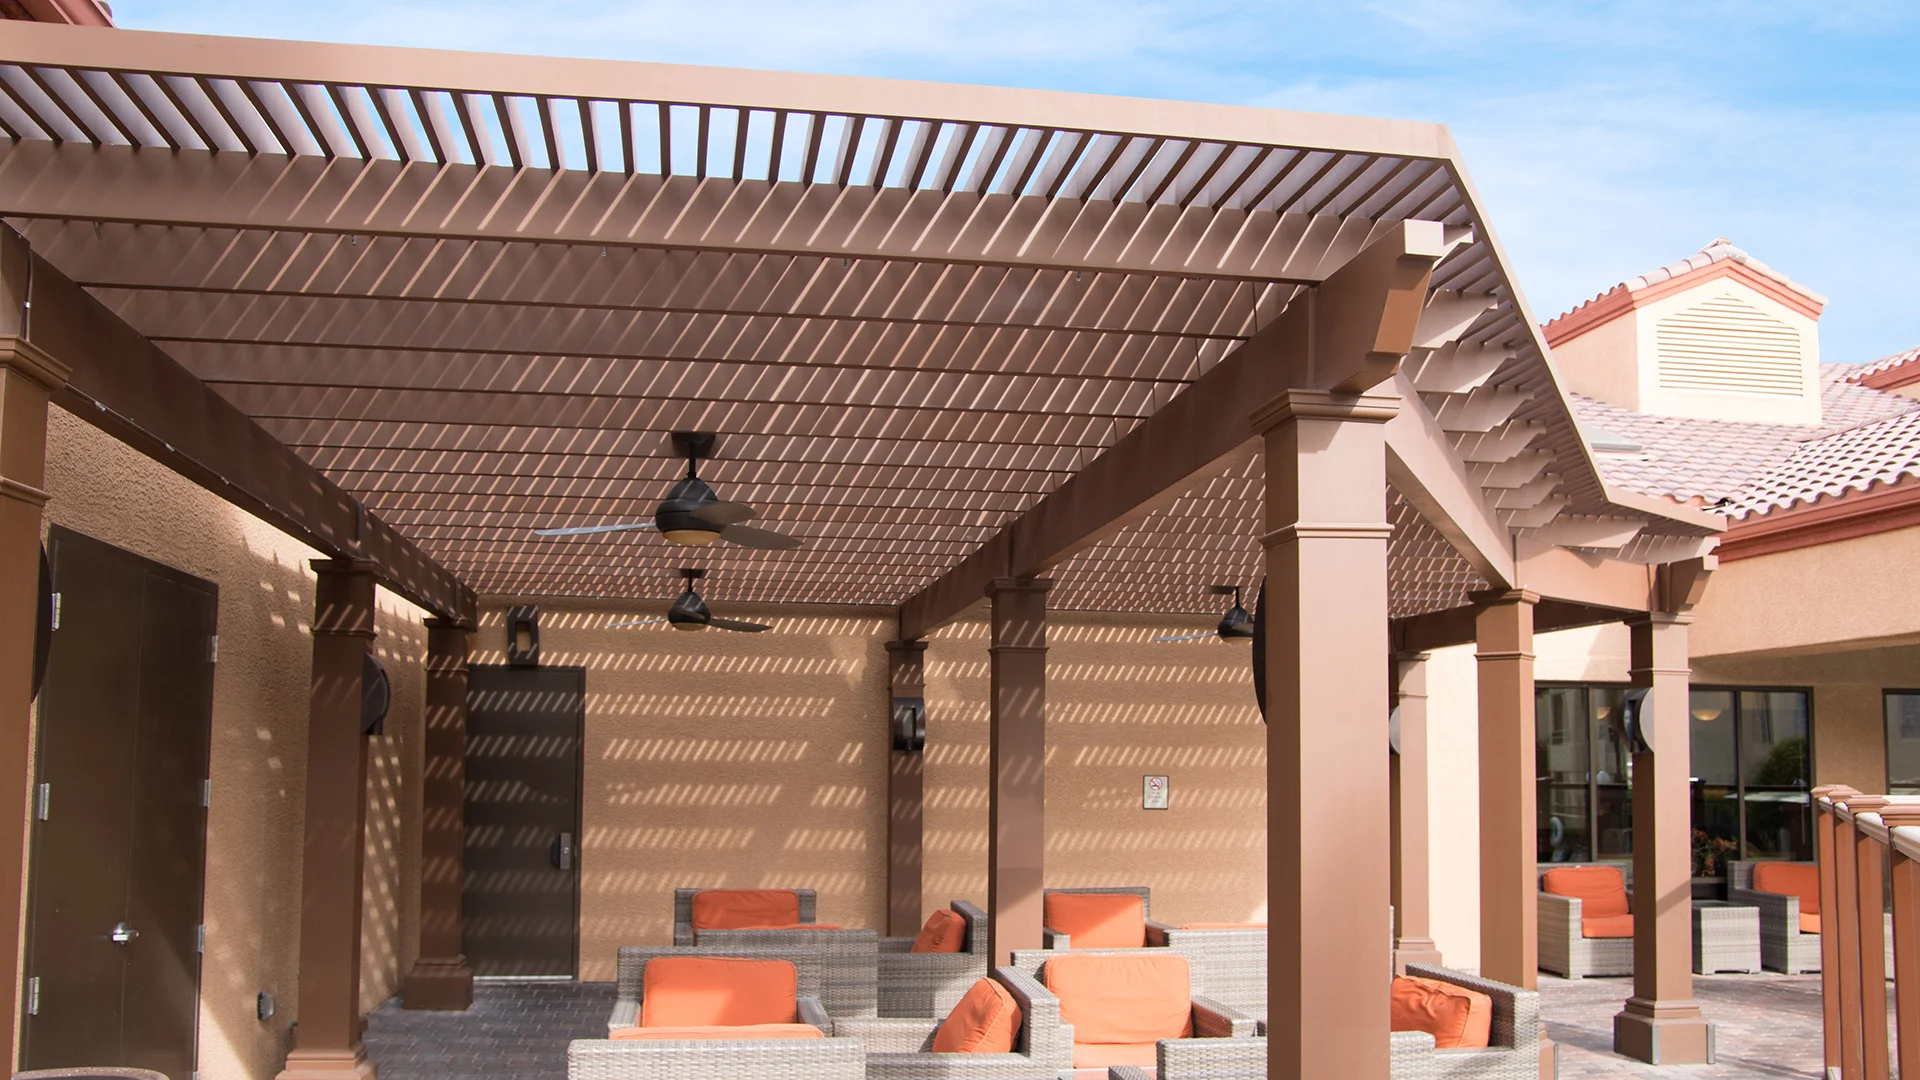 Featured image for “Holiday Inn: Custom Trex Pergola Kit in Las Vegas”Fong Construction worked with Holiday Inn Desert Club Resort located in Las Vegas to create a shade producing custom Trex Pergola. They wanted to provide respite for resort guests and pool goers from Nevada’s sweltering sun, while incorporating electrical features for added amenities.12338:full